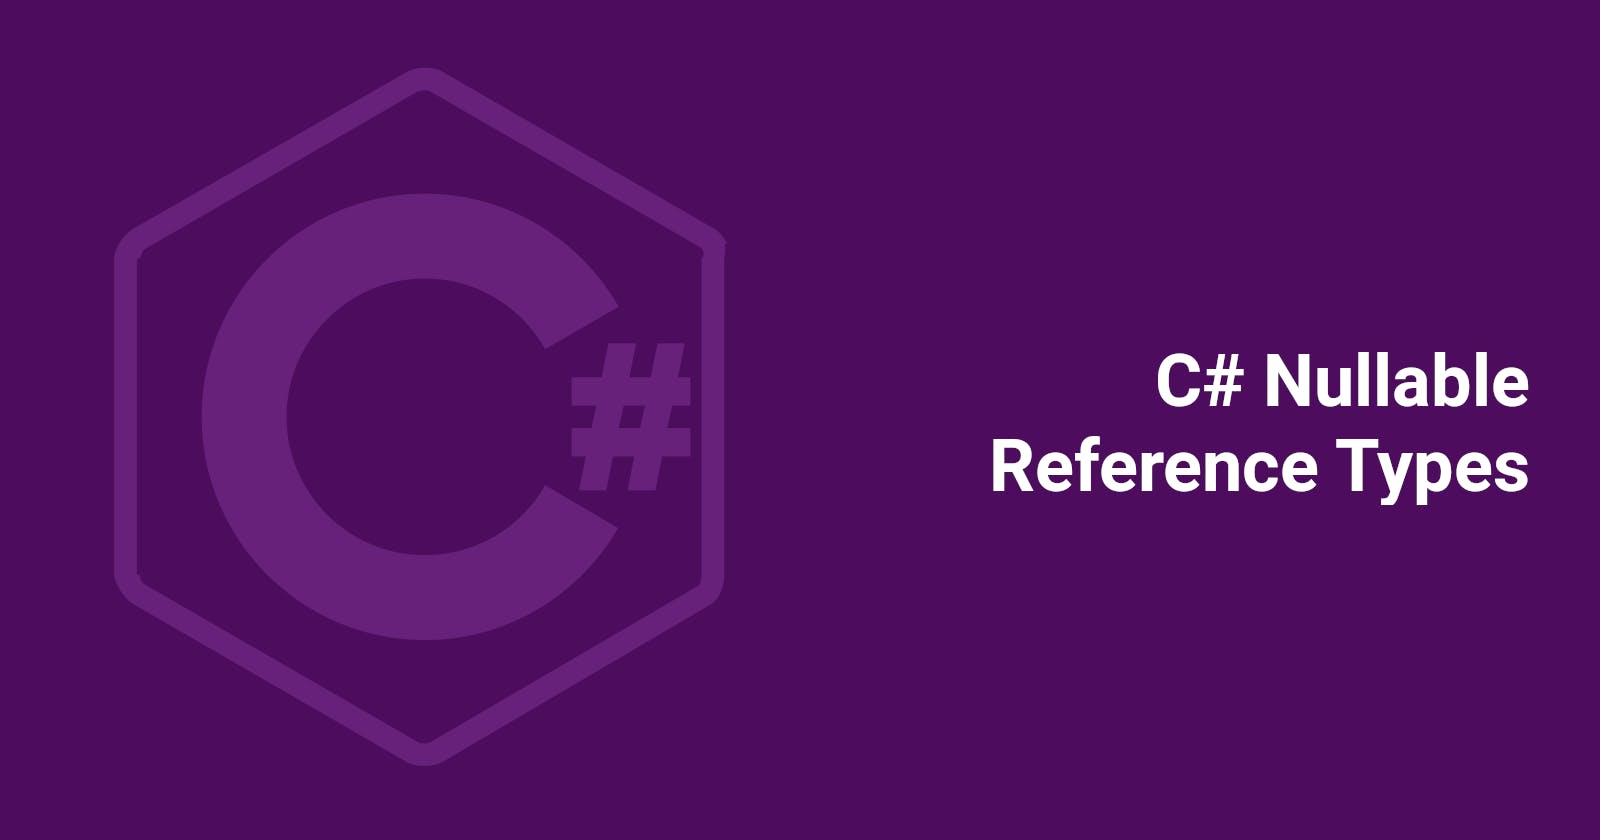 C# Nullable Reference Types